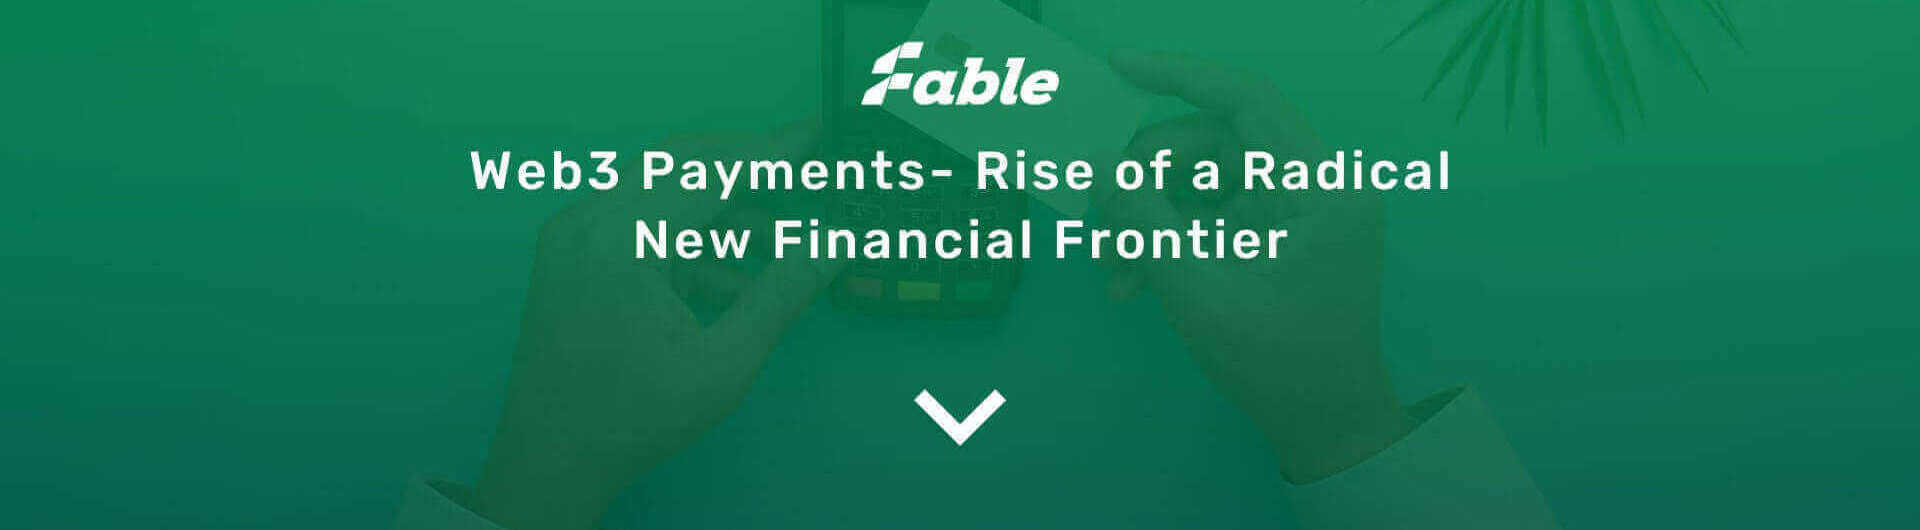 Web3 Payments - Rise of a Radical New Financial Frontier